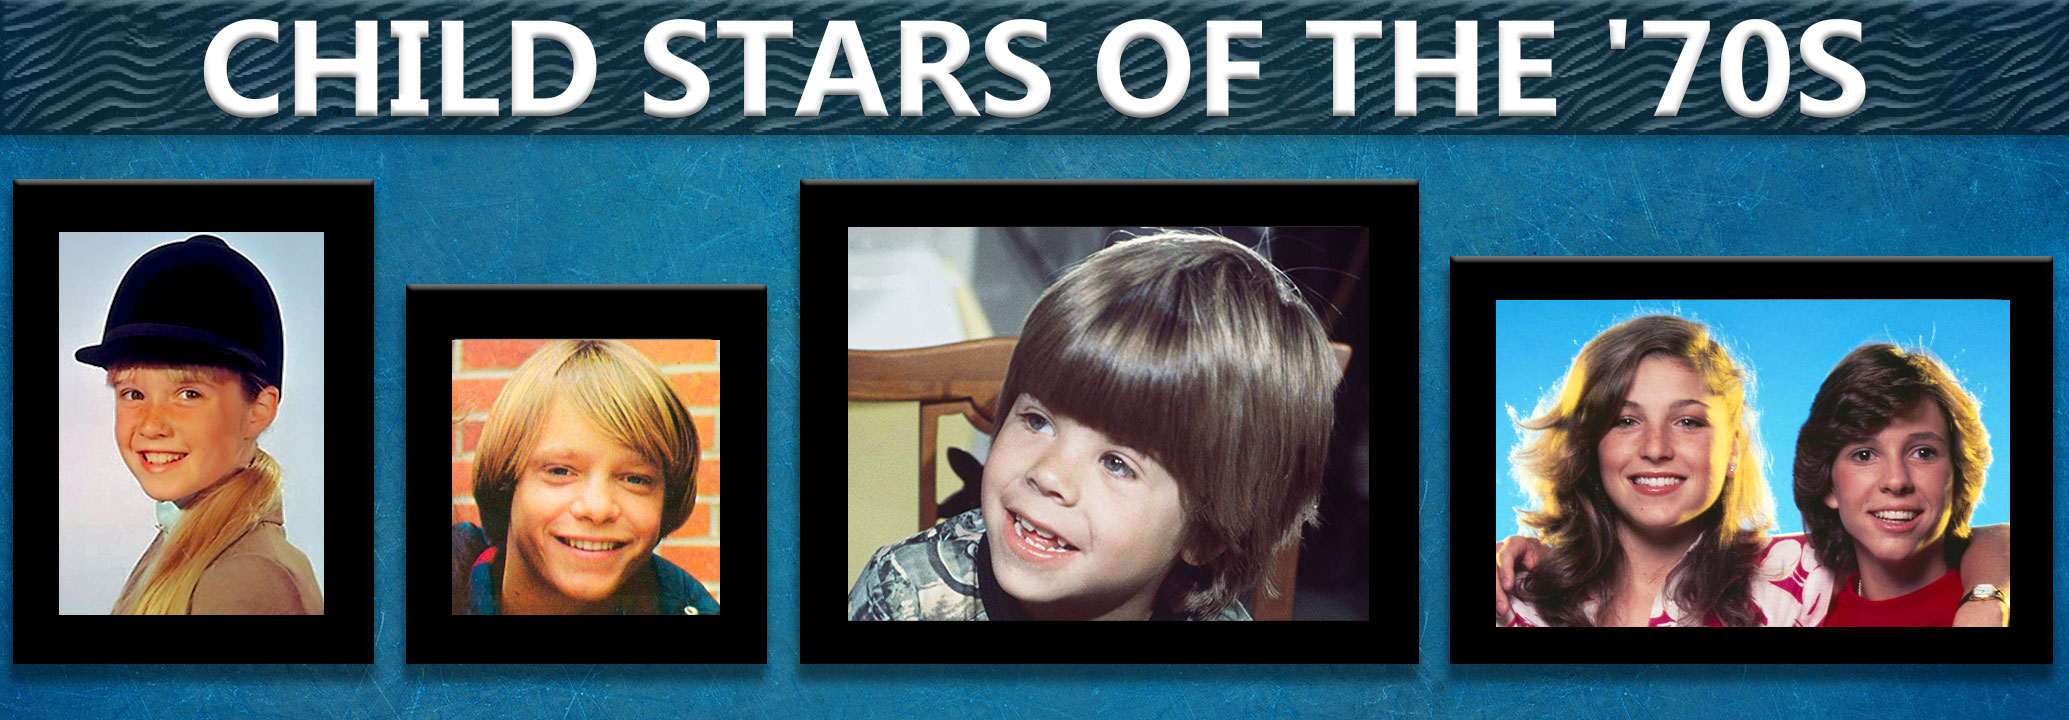 Child Stars of the '70s – Where Are They Now? « Celebrity Gossip and Movie News